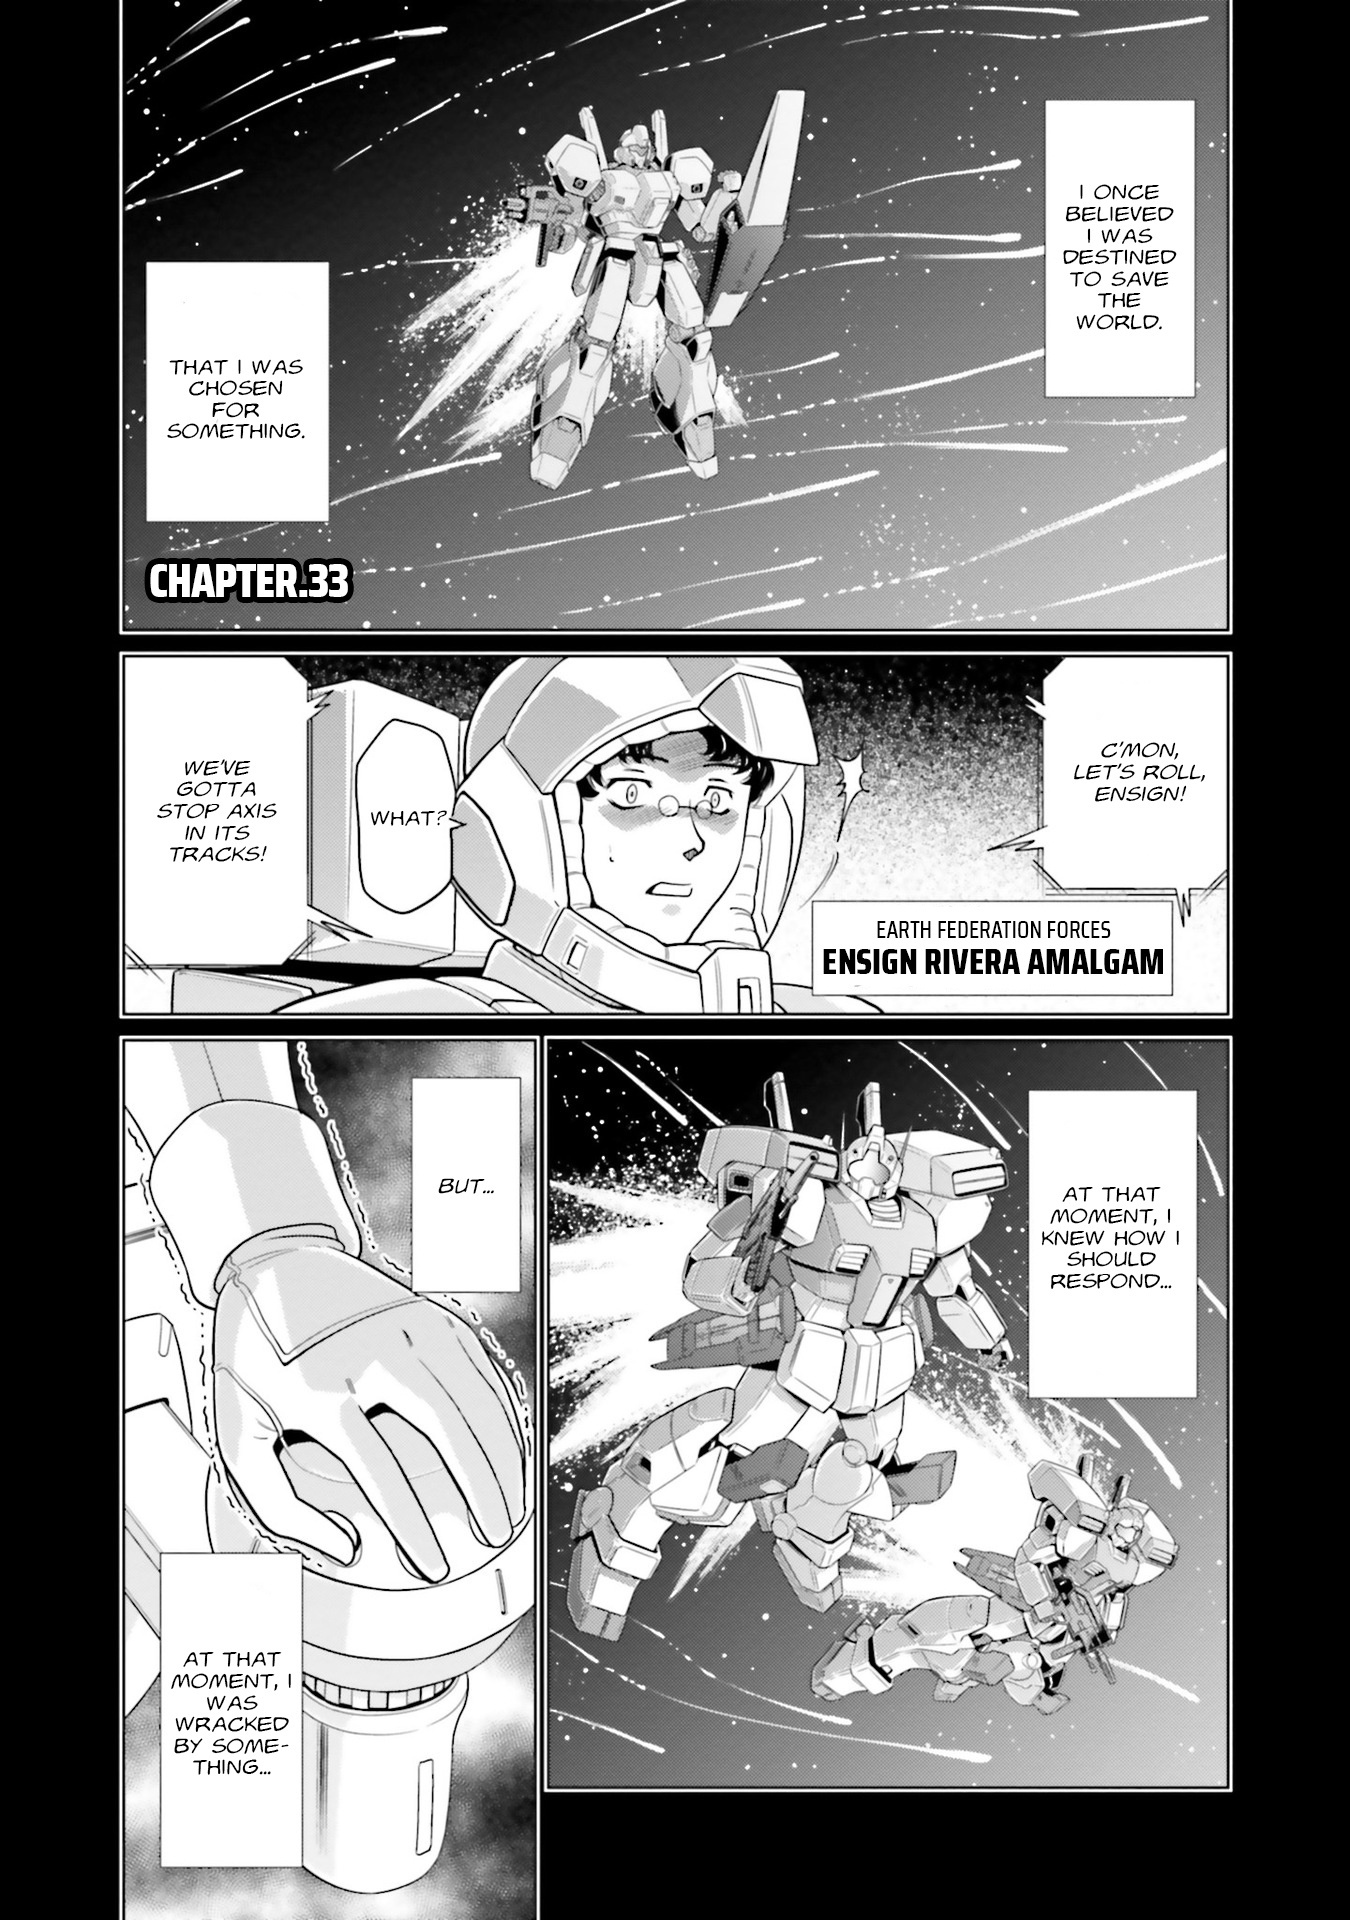 Mobile Suit Gundam F90 Ff Vol.8 Chapter 33: Chasing After Fragments Of Shattered Dreams - Picture 1